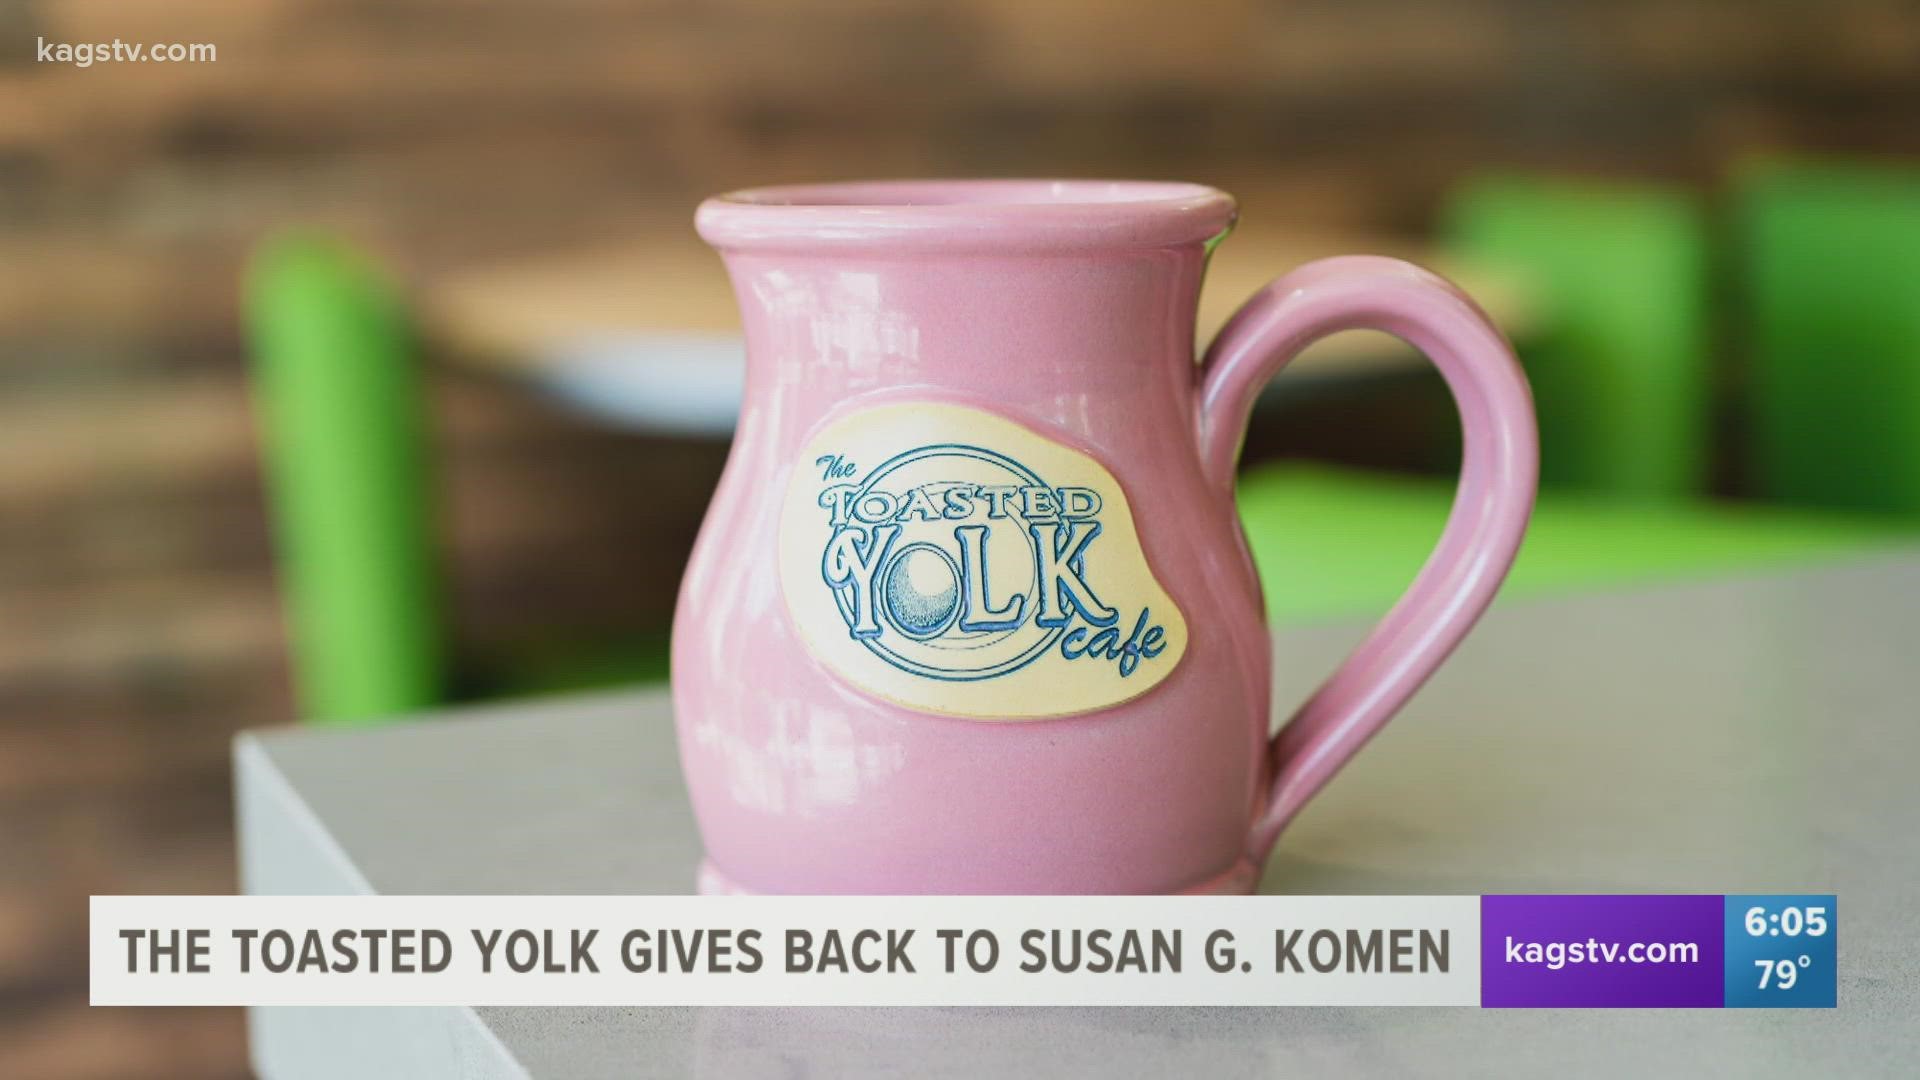 The popular full-service neighborhood eatery will donate $5 to Susan G. Komen for every limited-edition pink mug sold, while supplies last.